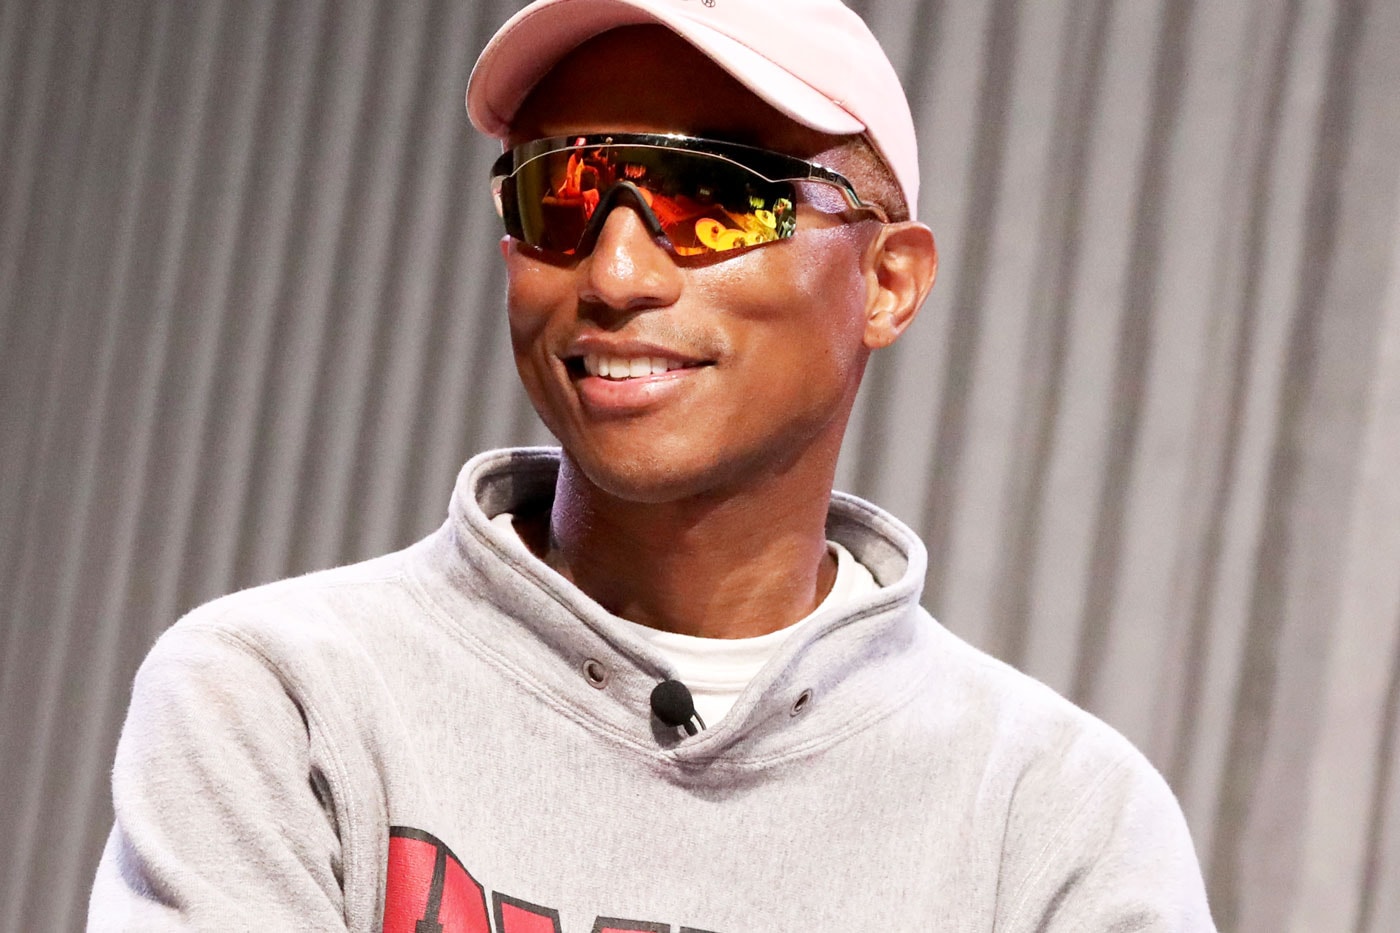 Pharrell Creates Mobile Game to Raise Awareness About Ocean Pollution